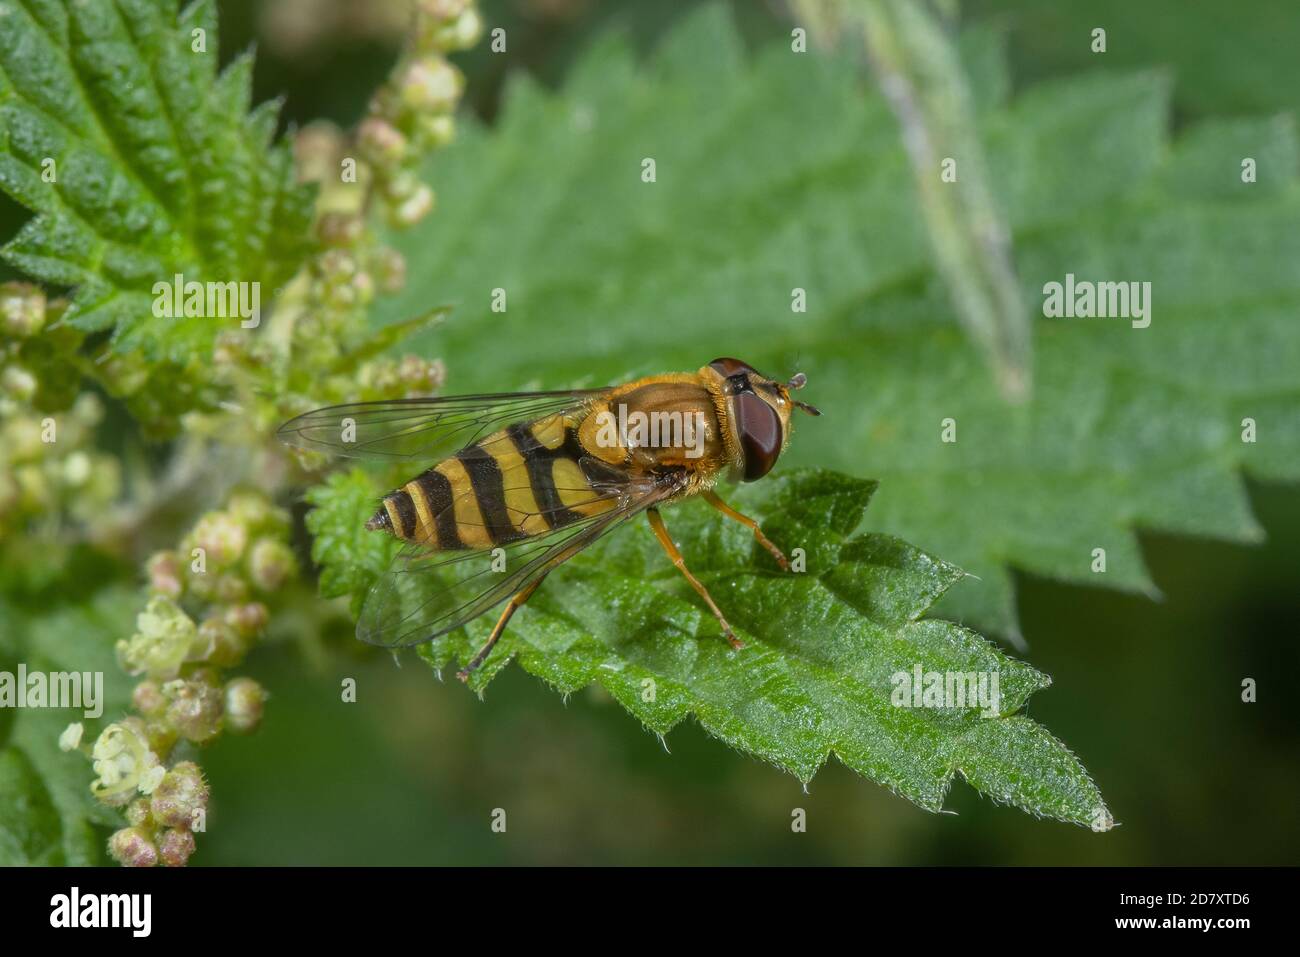 Common banded hoverfly, Syrphus ribesii, resting on nettle leaf. Stock Photo